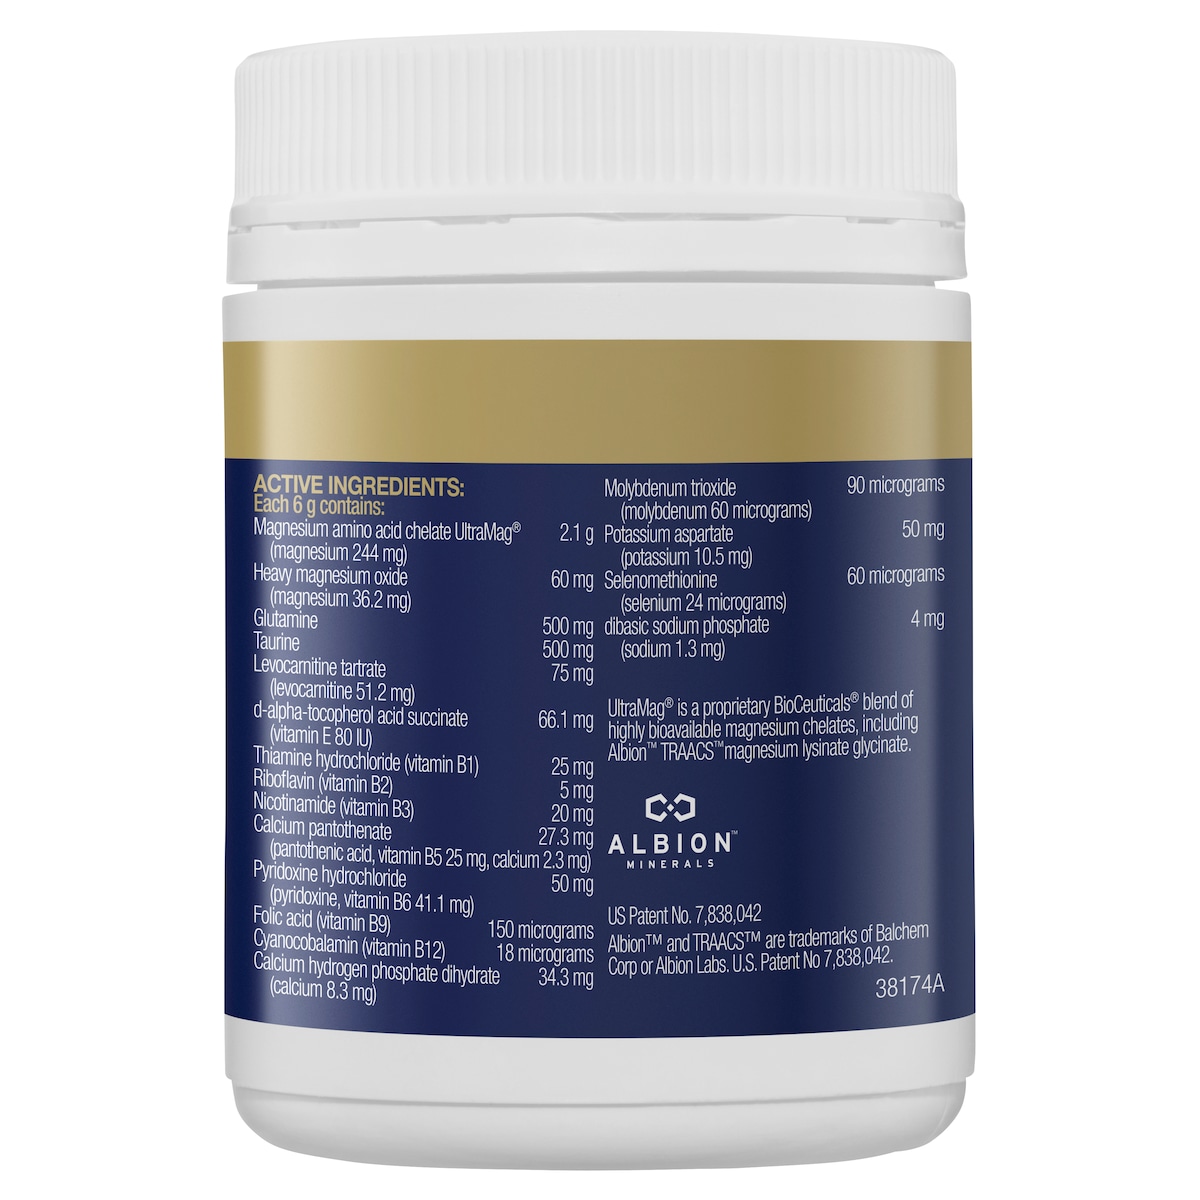 Bioceuticals Ultra Muscleze Forest Berries 180G